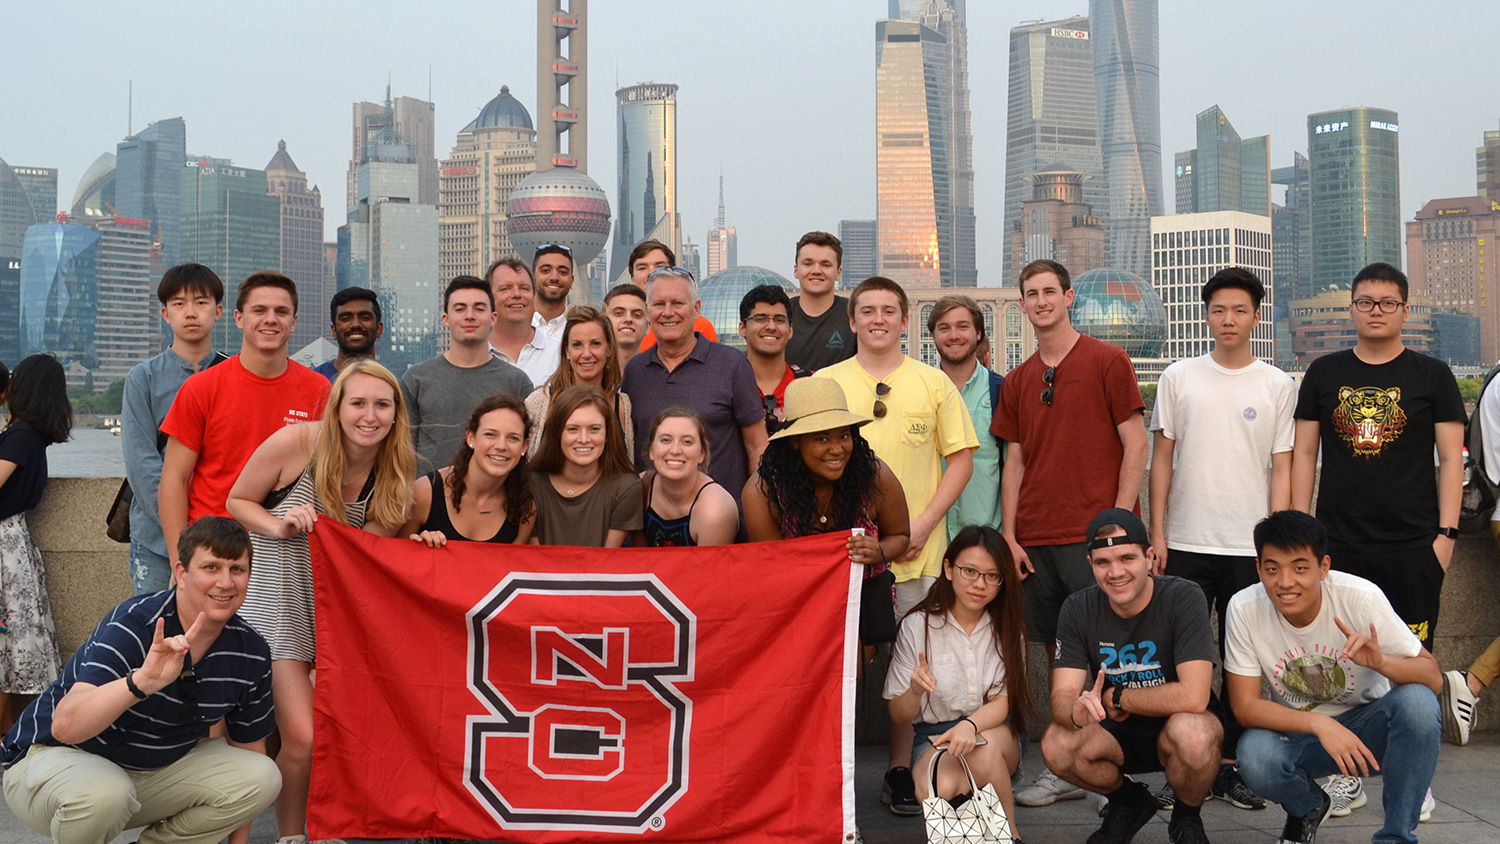 Poole College's supply chain summer program in China included sight-seeing and visits to factories.